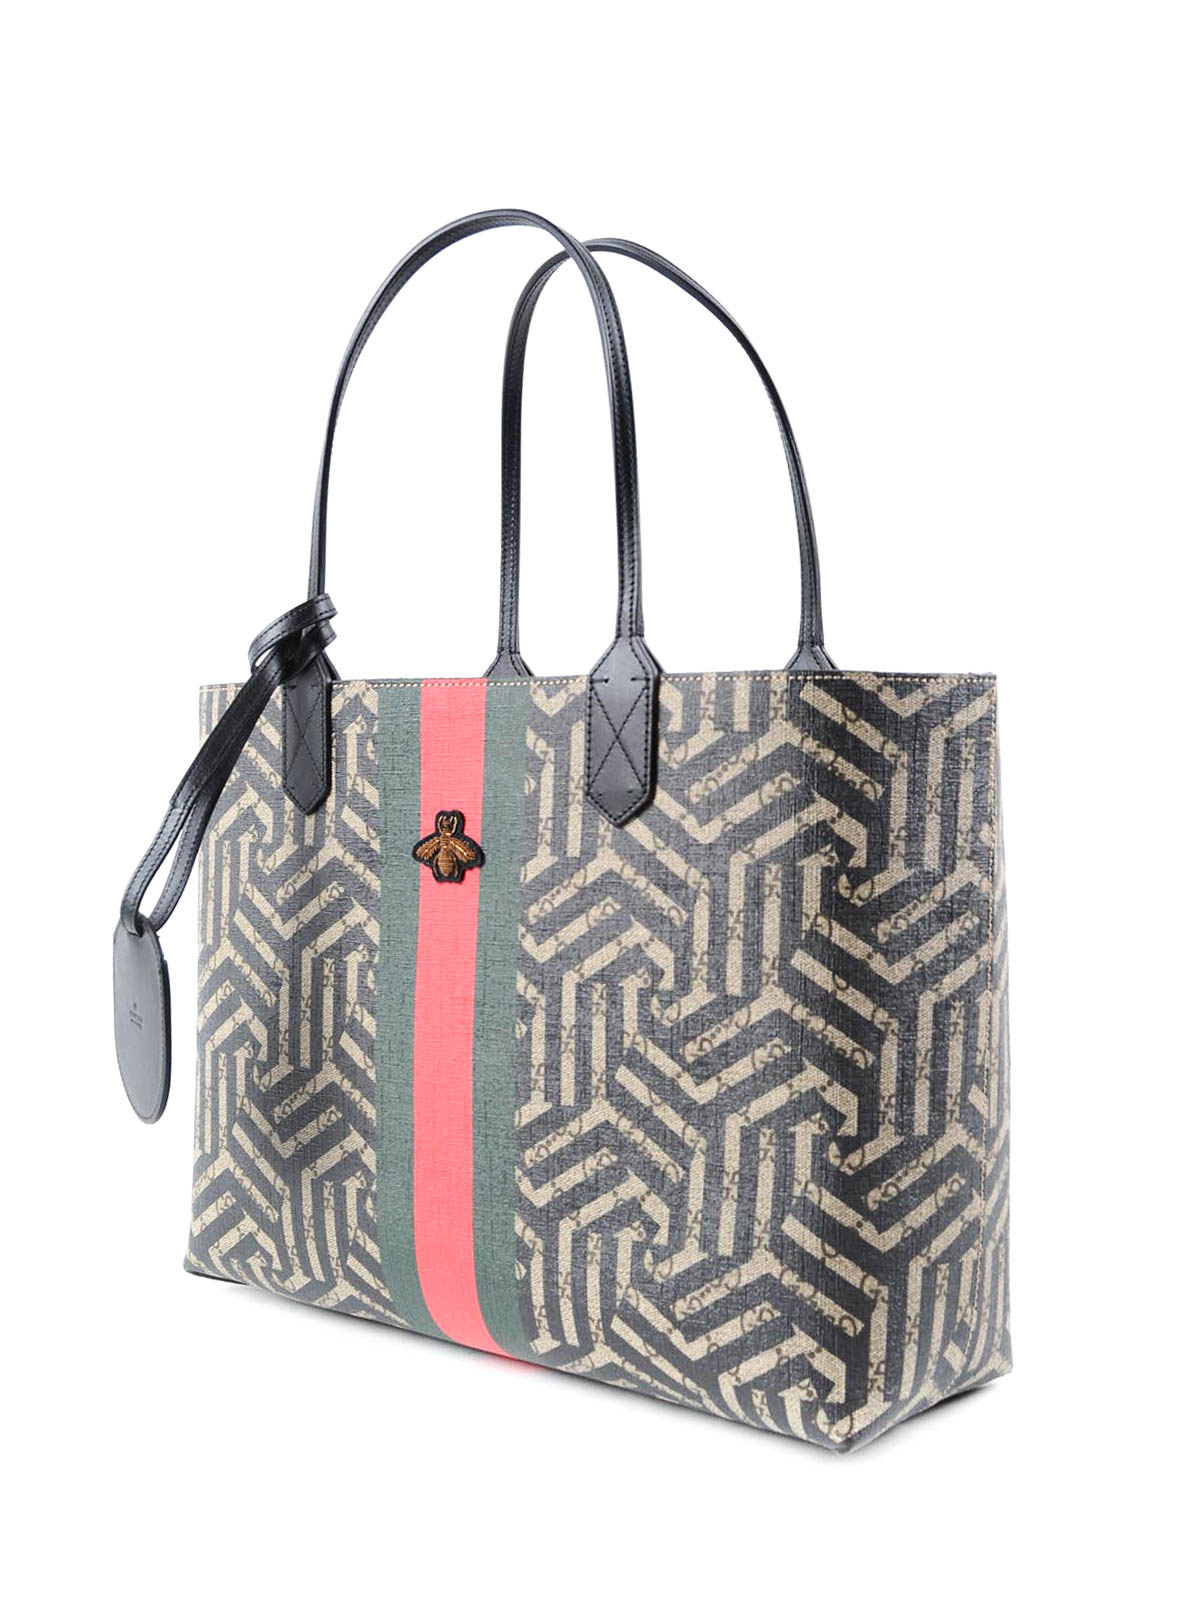 GG Caleido Web tote bag by Gucci - totes bags | iKRIX